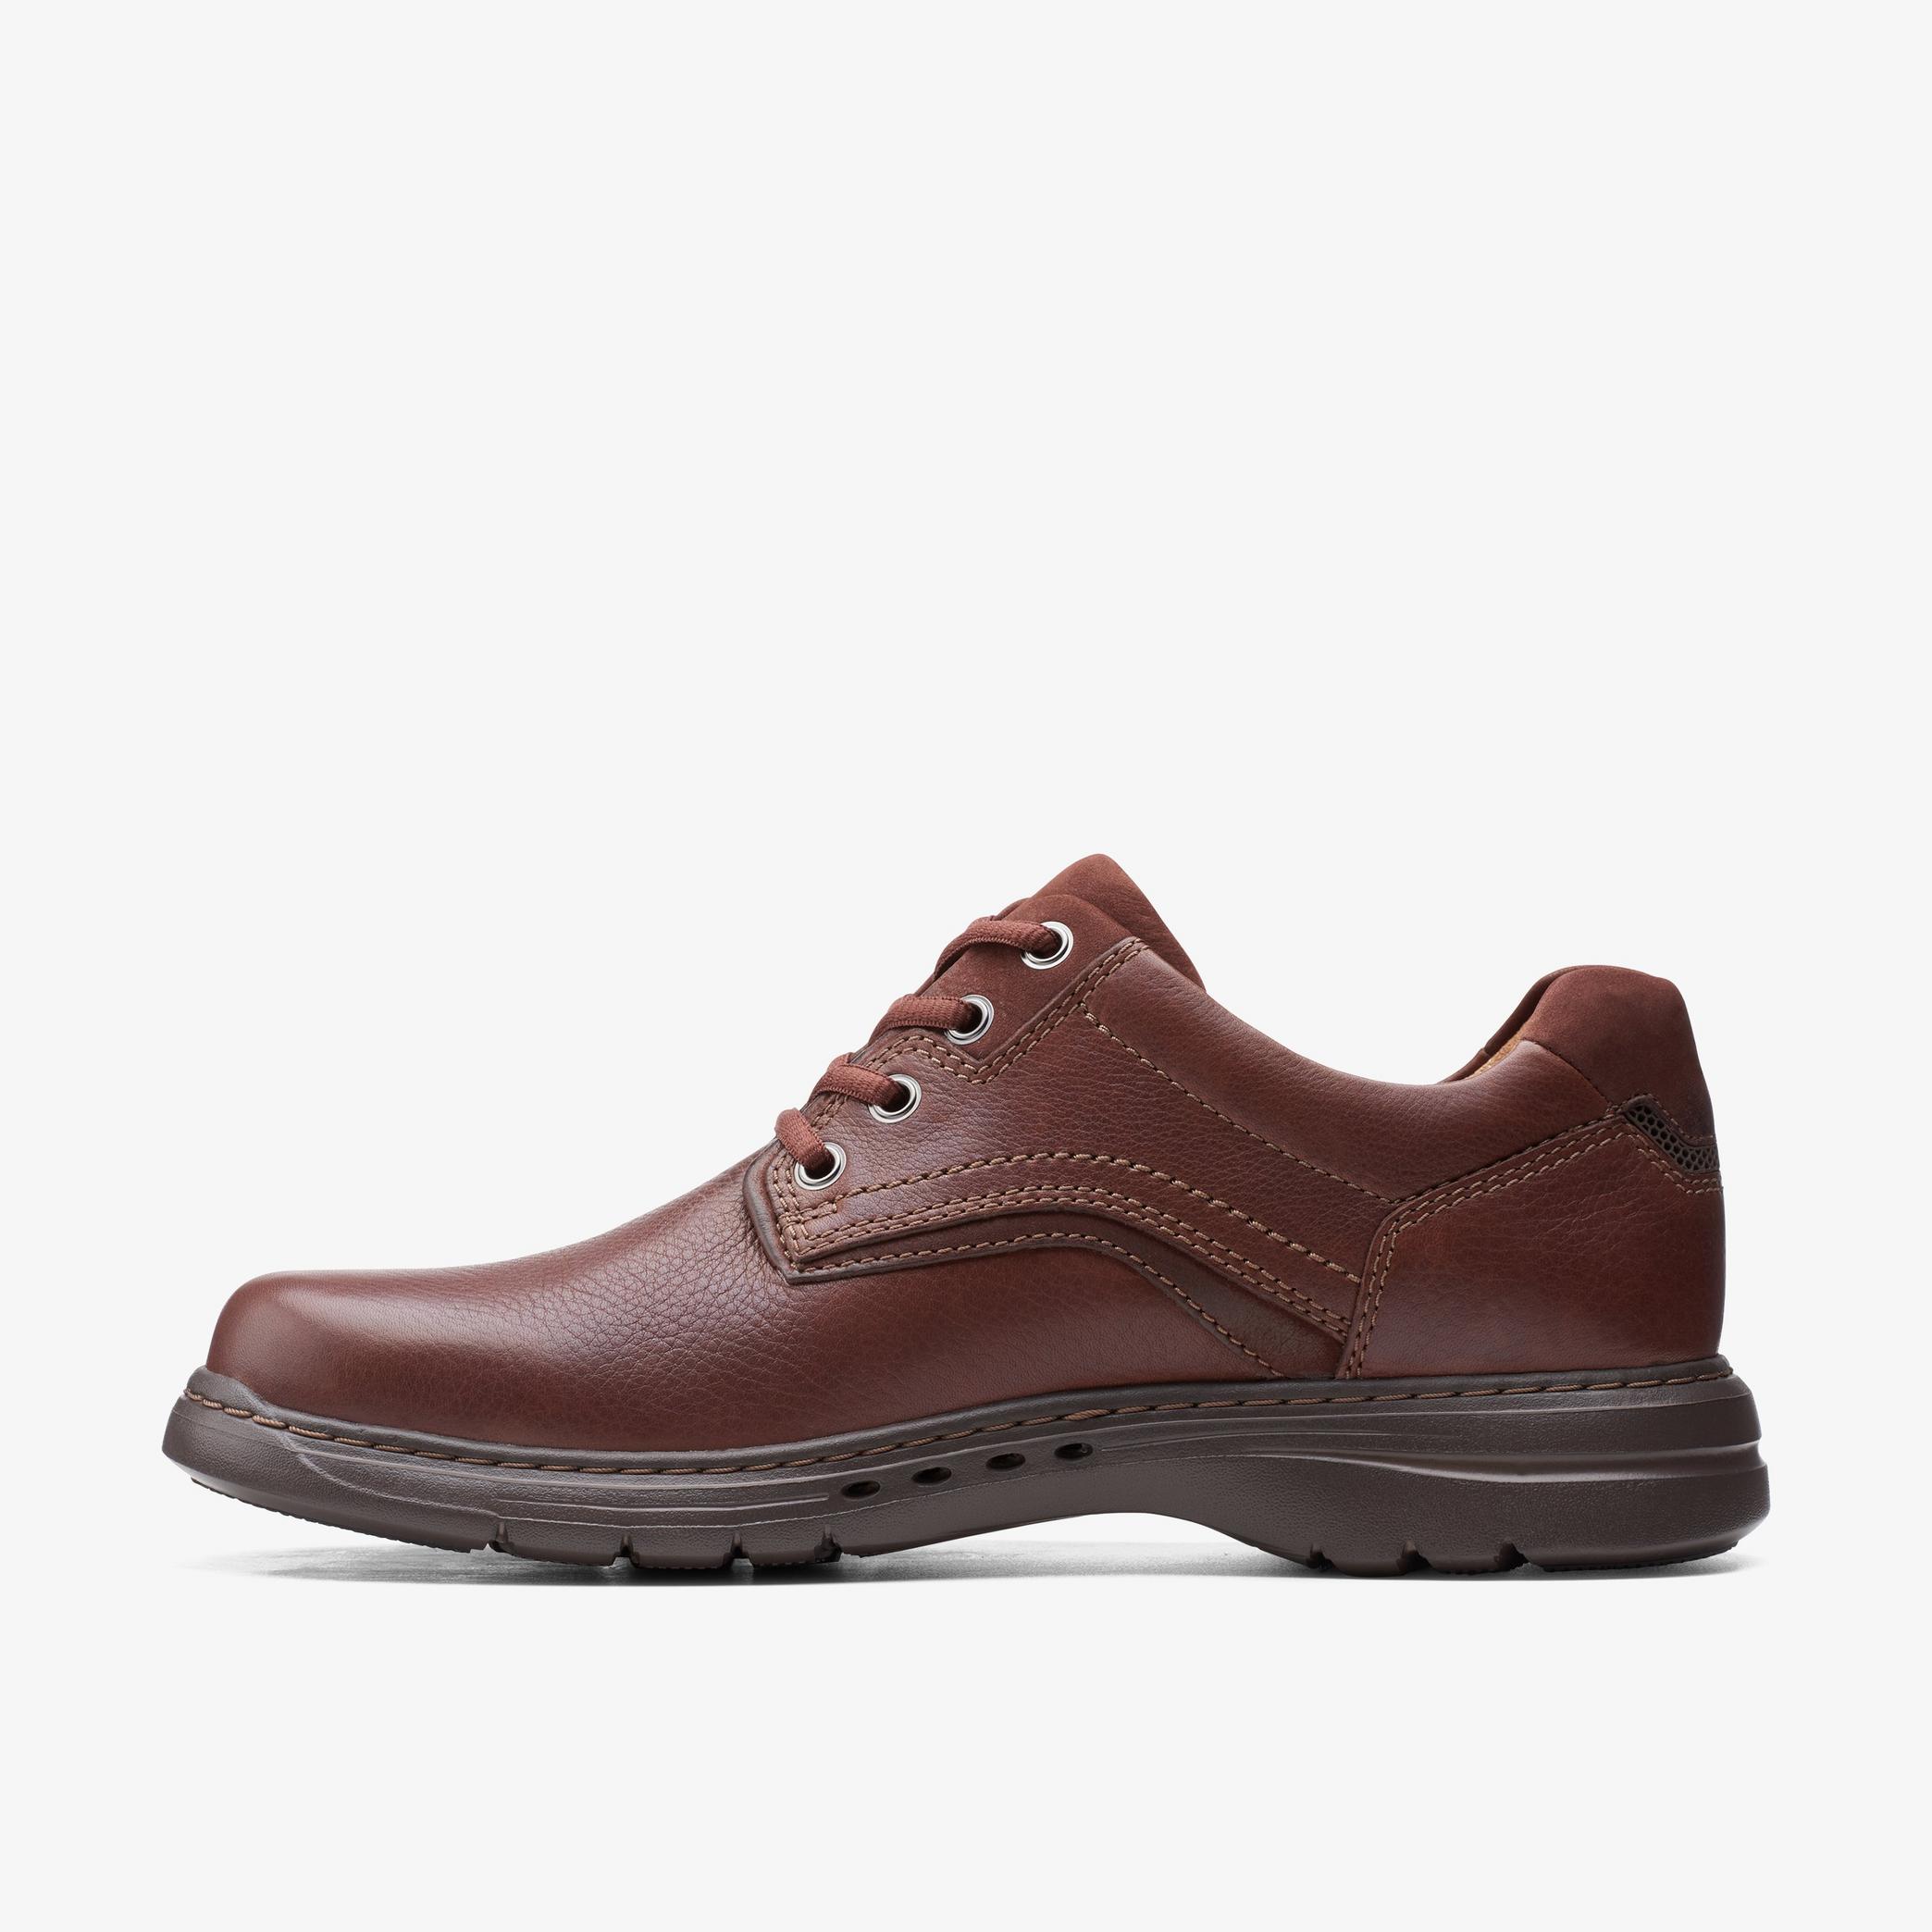 MENS Brawley Pace Mahogany Leather Oxford Shoes | Clarks US